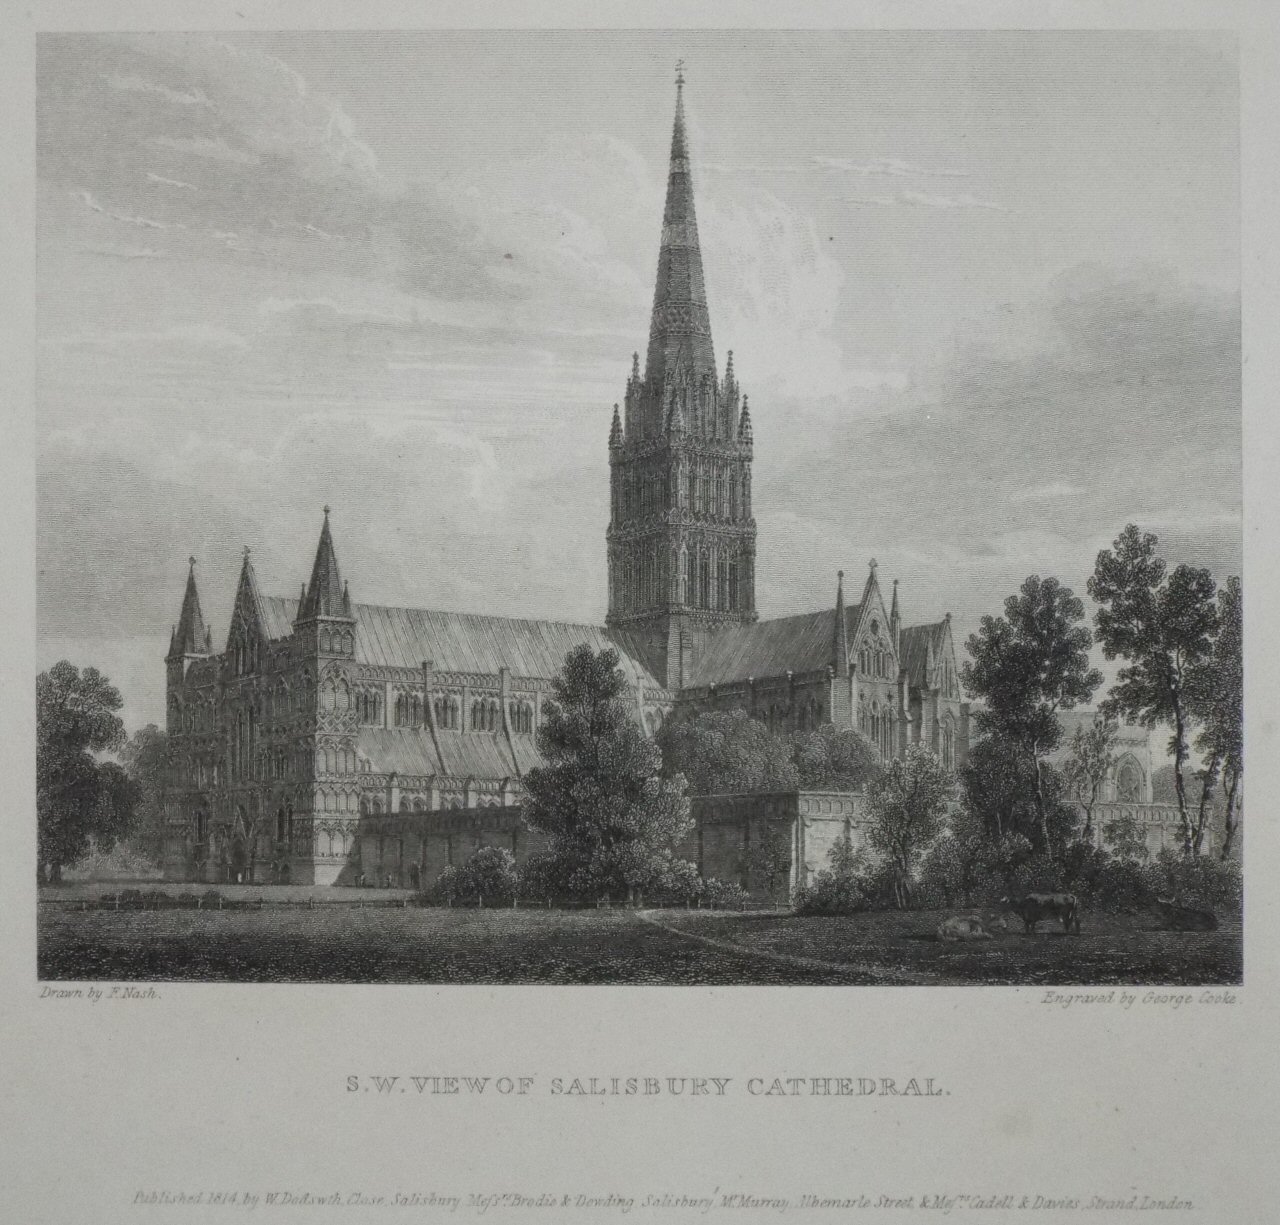 Print - S. W. View of Salisbury Cathedral. - Cooke